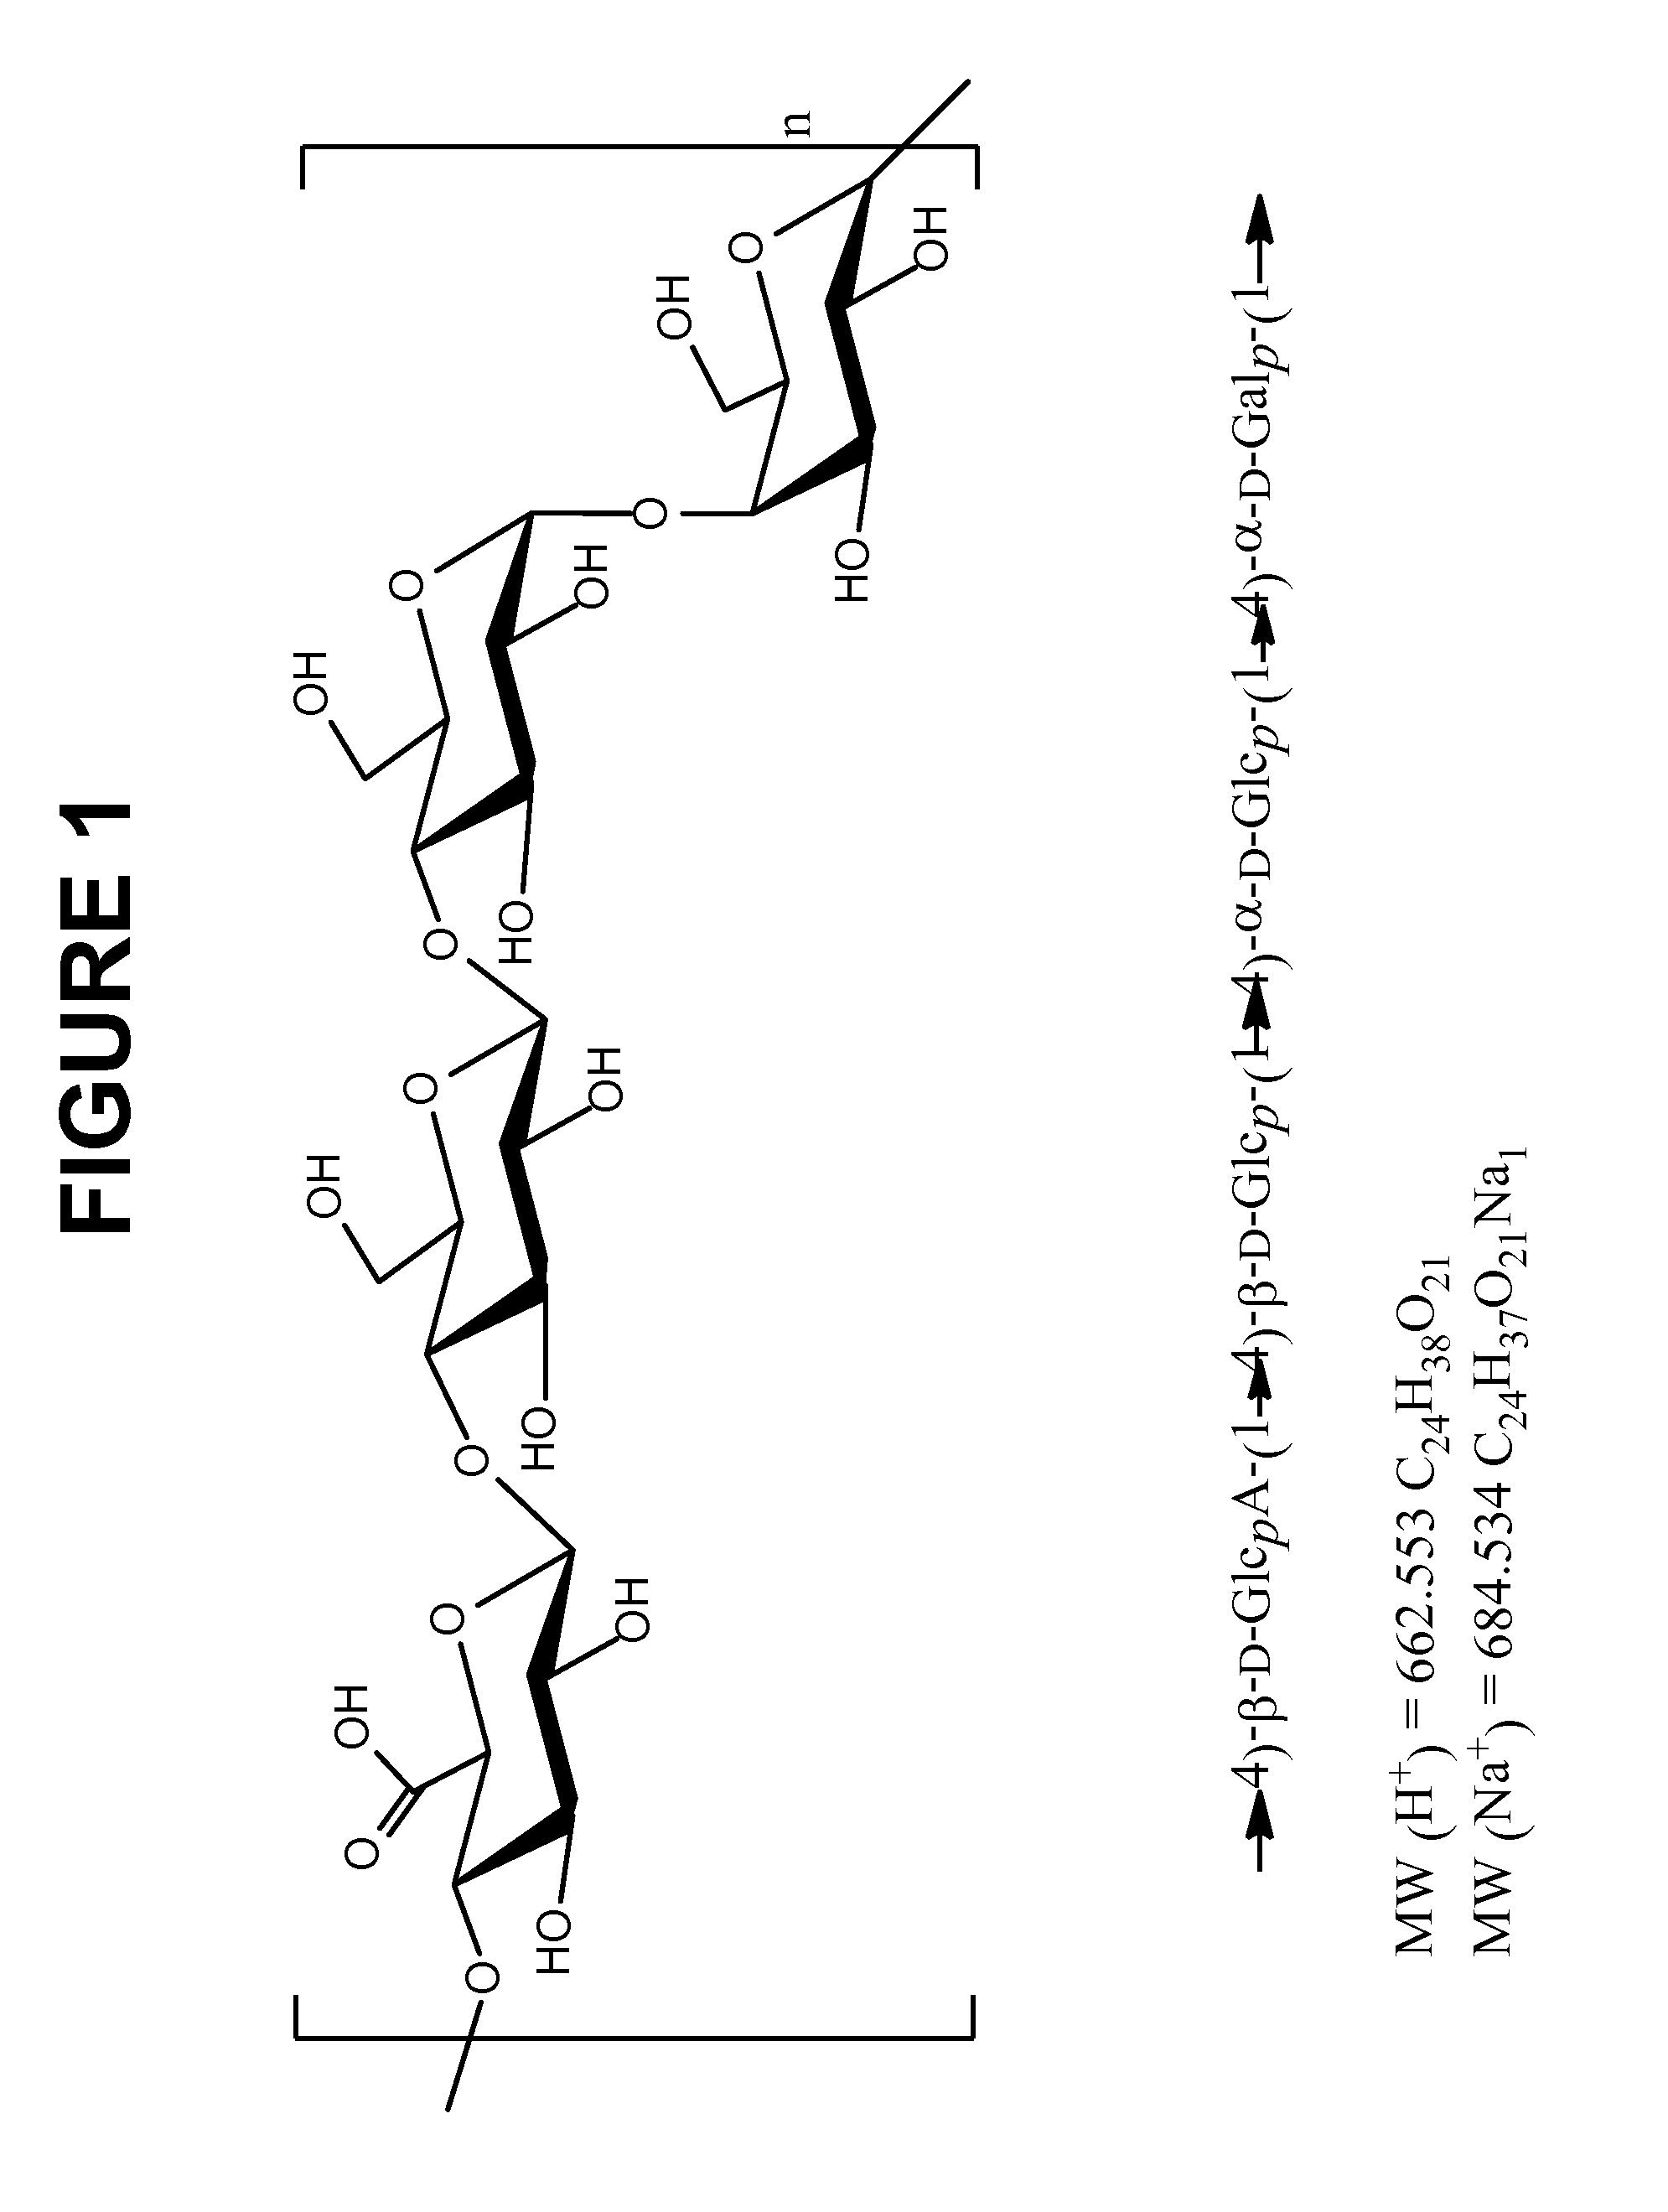 Immunogenic Compositions Comprising Conjugated Capsular Saccharide Antigens and Uses Thereof